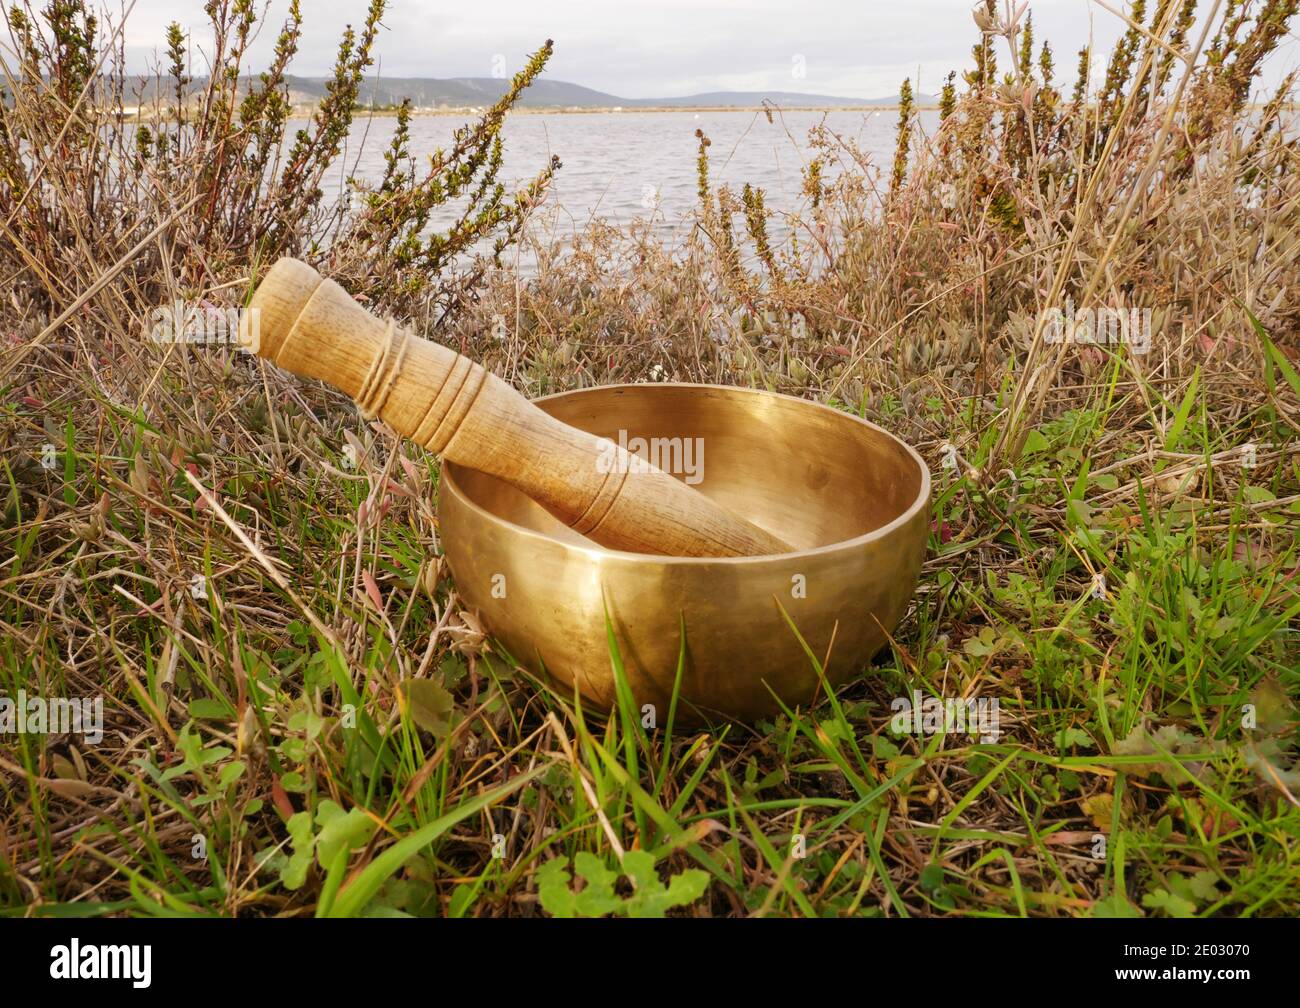 Singing bowl placed on the grass with the pond in the background Stock Photo